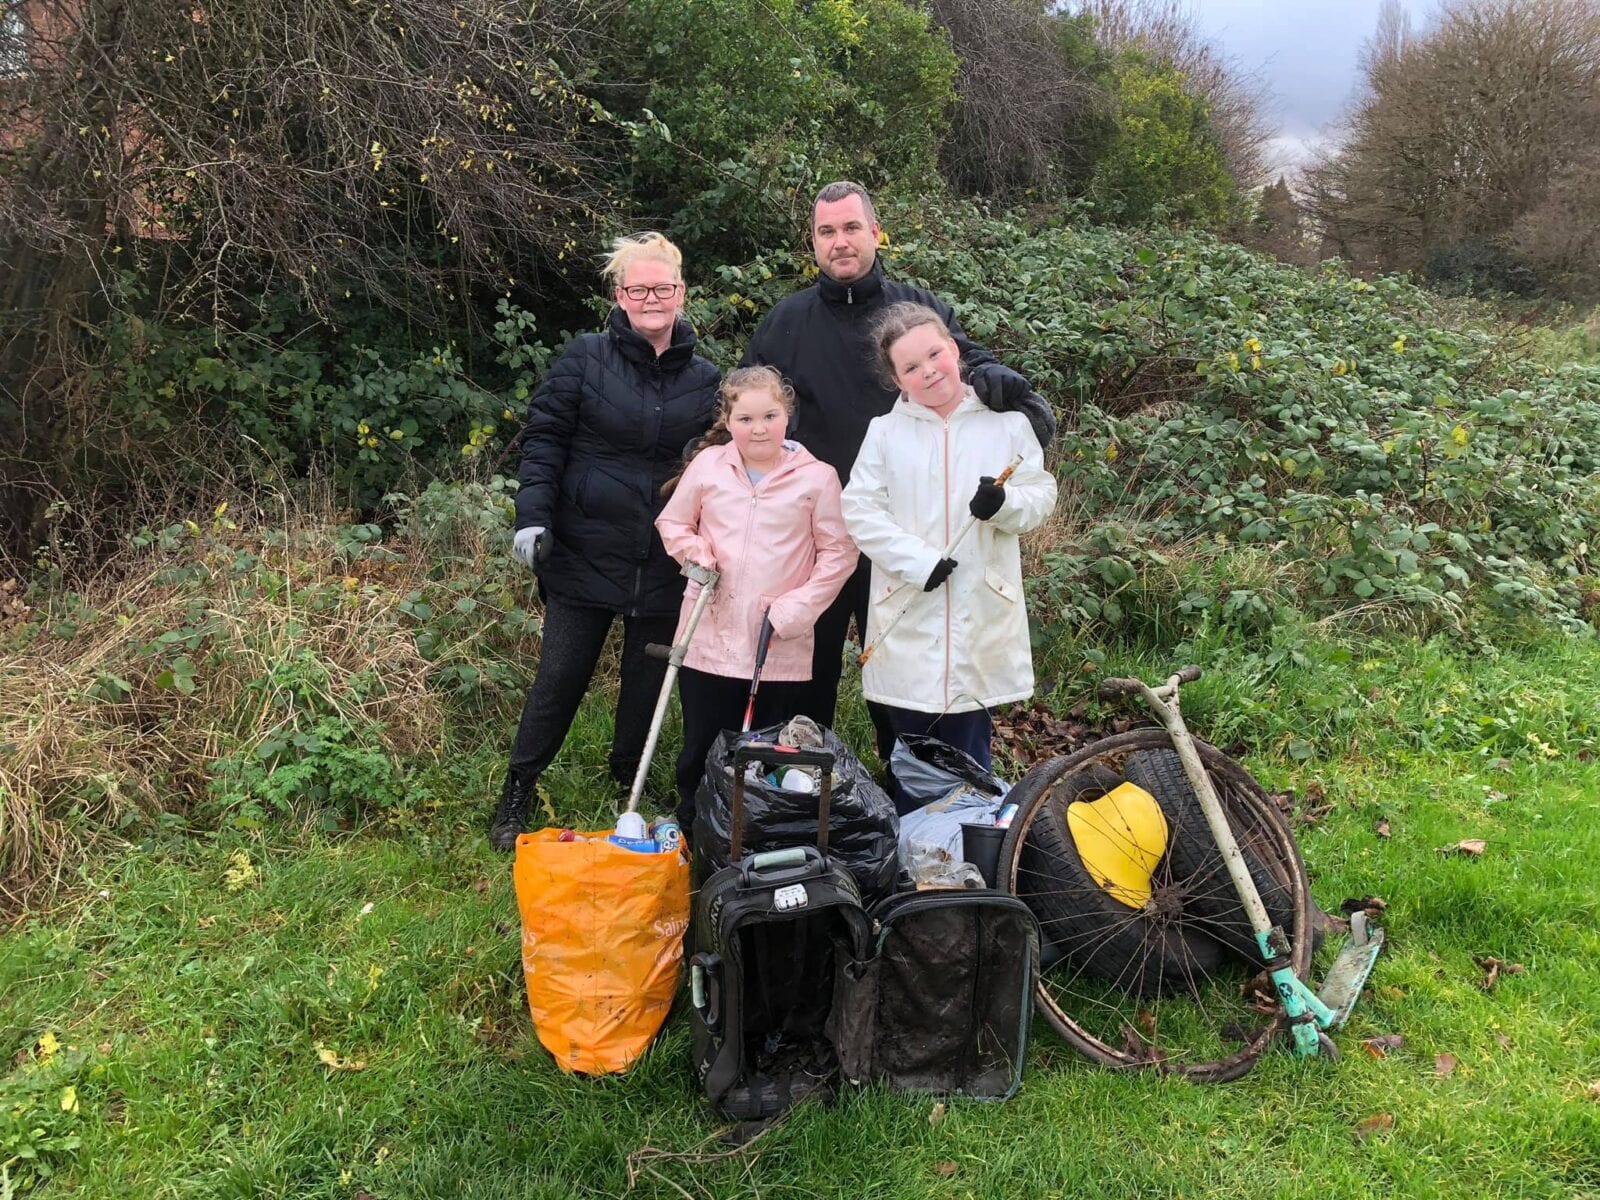 The local family making Wythenshawe proud after becoming &#8216;waste warriors&#8217;, The Manc